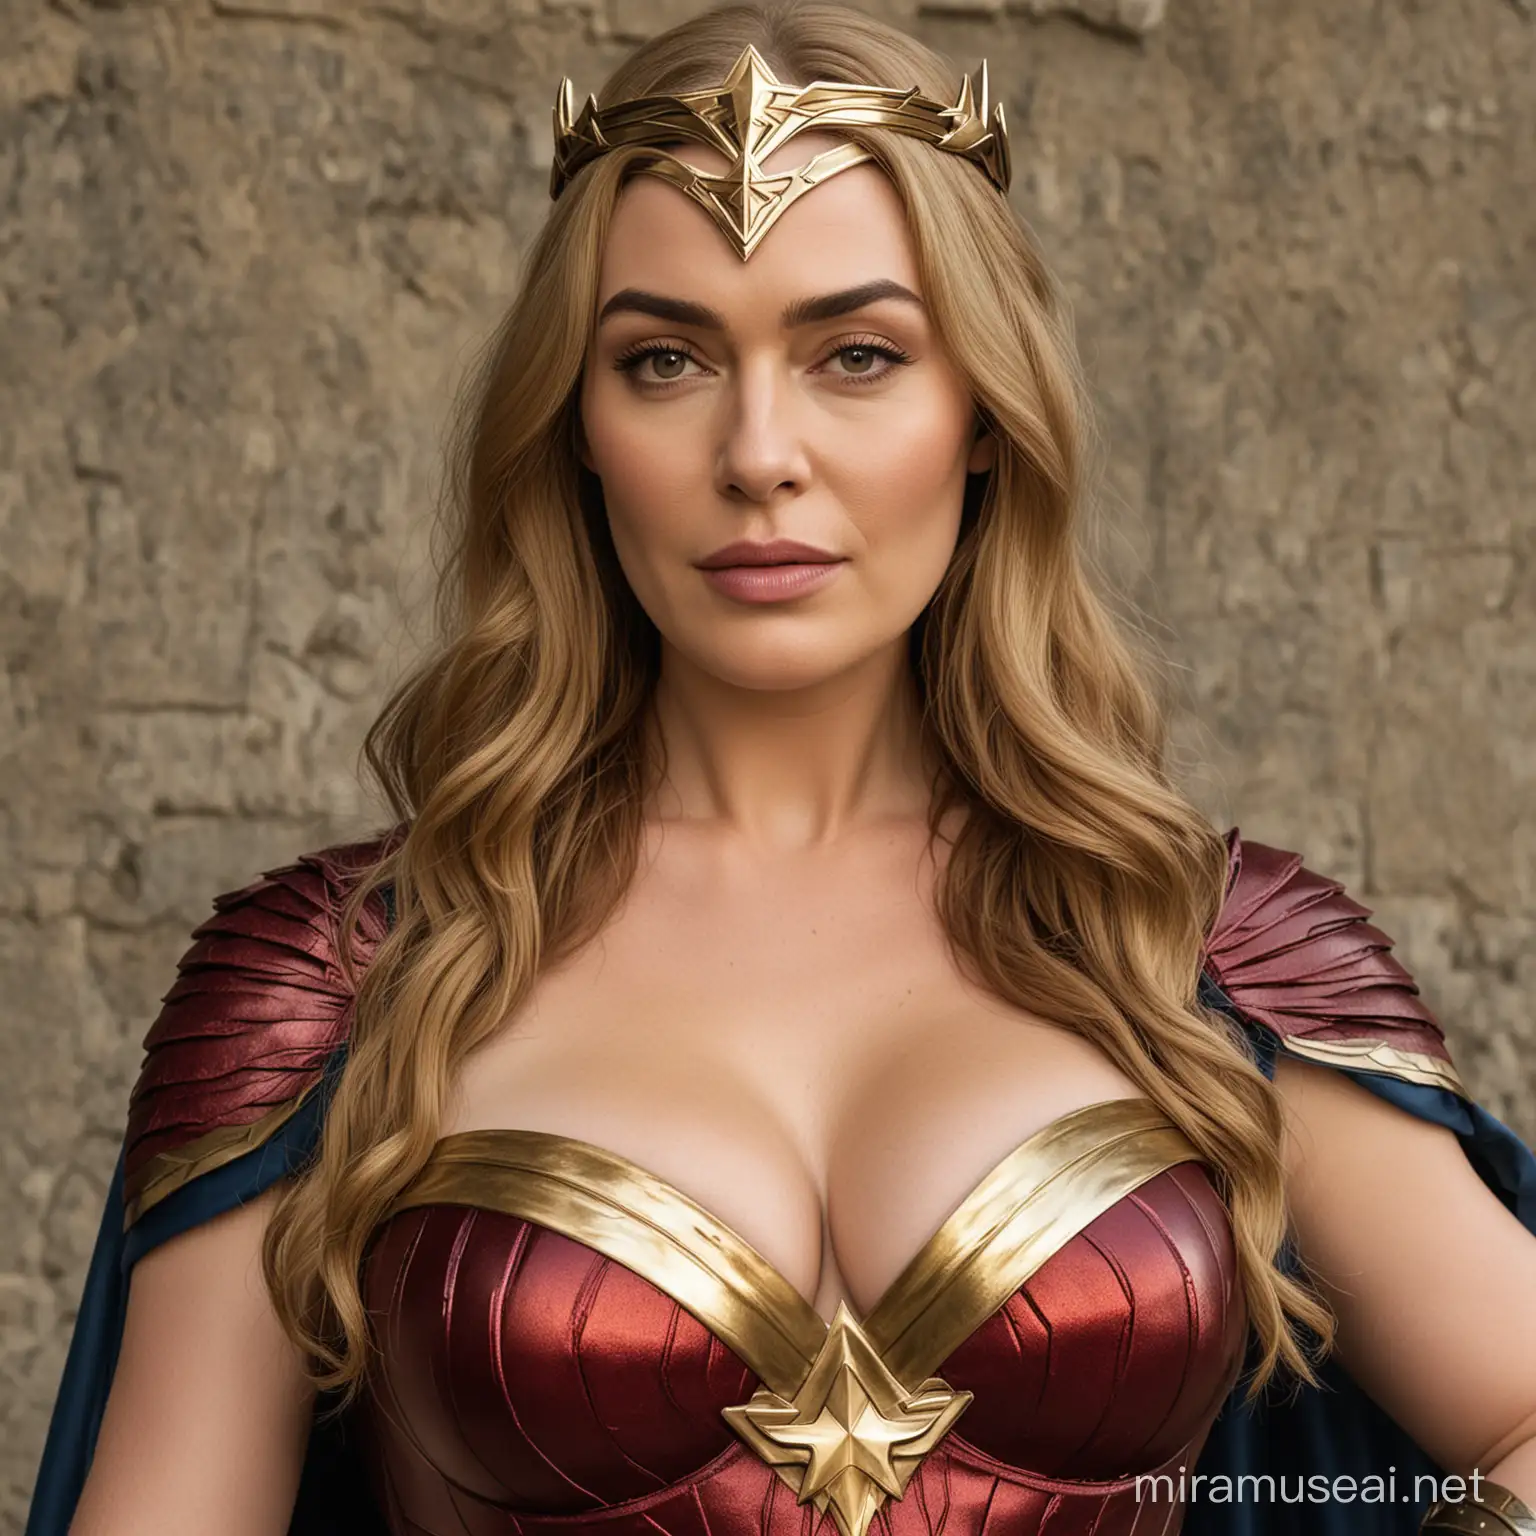 cersei lannister dressed as Wonder Woman, bbw, giant breast, massive cleavage